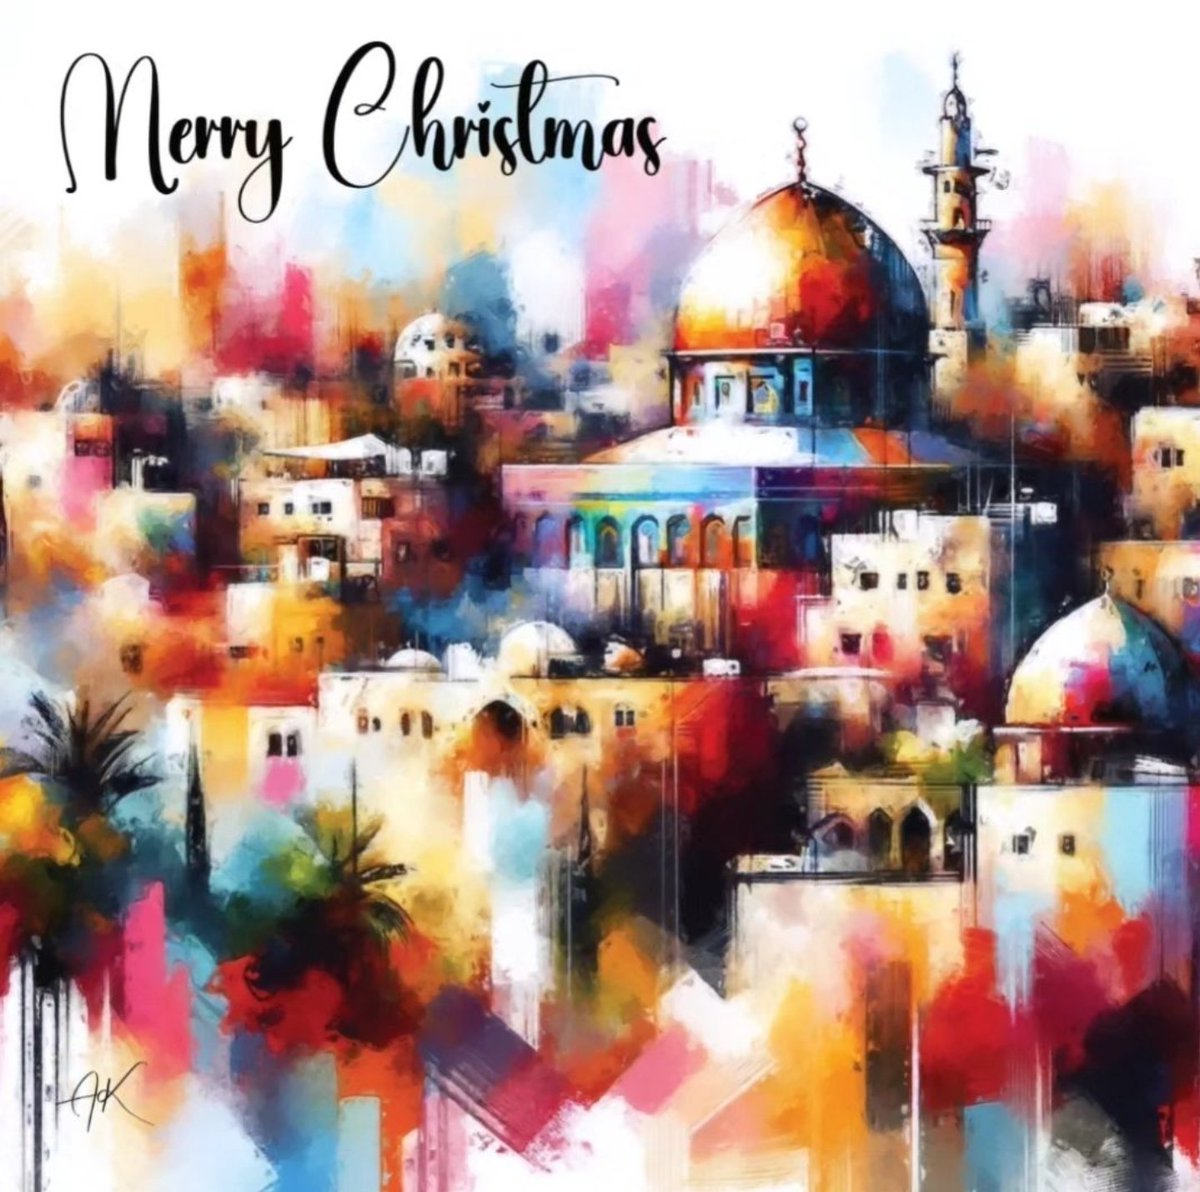 Christmas is a time of joy and family, but it is also a time to remember those less fortunate. The children of Gaza, facing relentless challenges, remind us of the true spirit of this season - compassion, kindness, and the unyielding hope for a better tomorrow. In this spirit